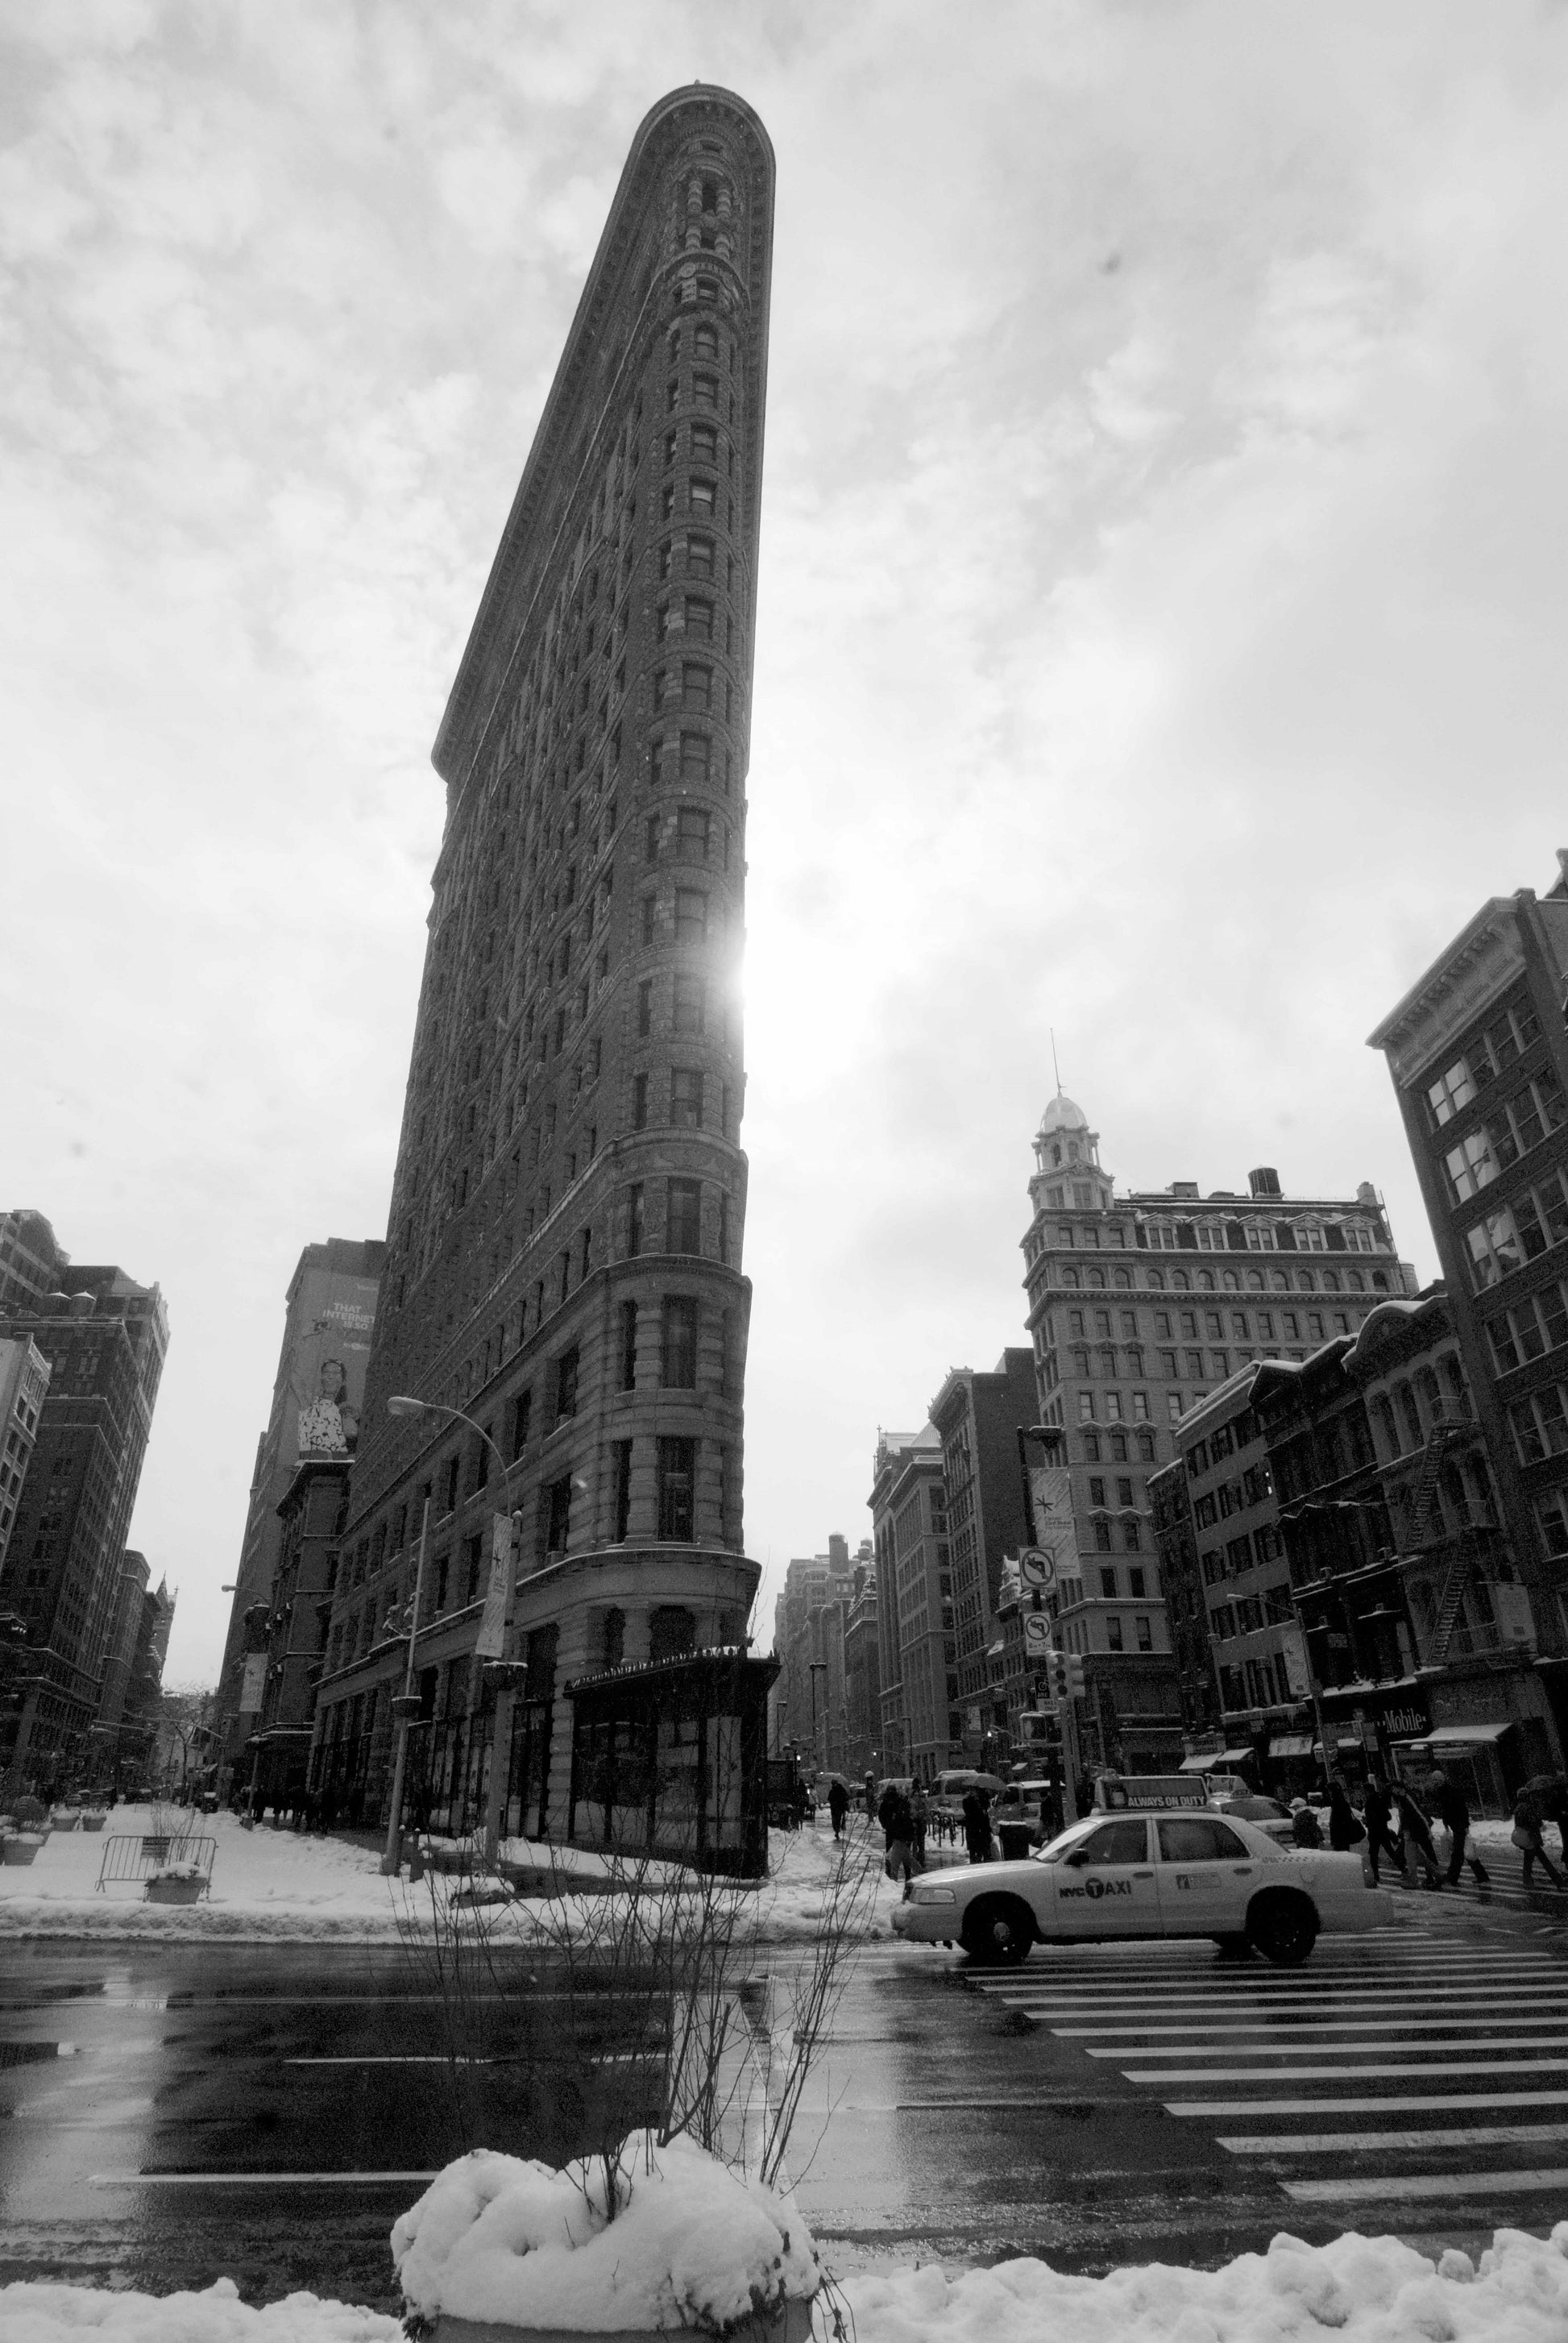 Alessandra Mattanza | LIGHT, Flatiron Building, New York. The iconic Flatiron building stands in the winter sunshine. Available as a print on acrylic glass.